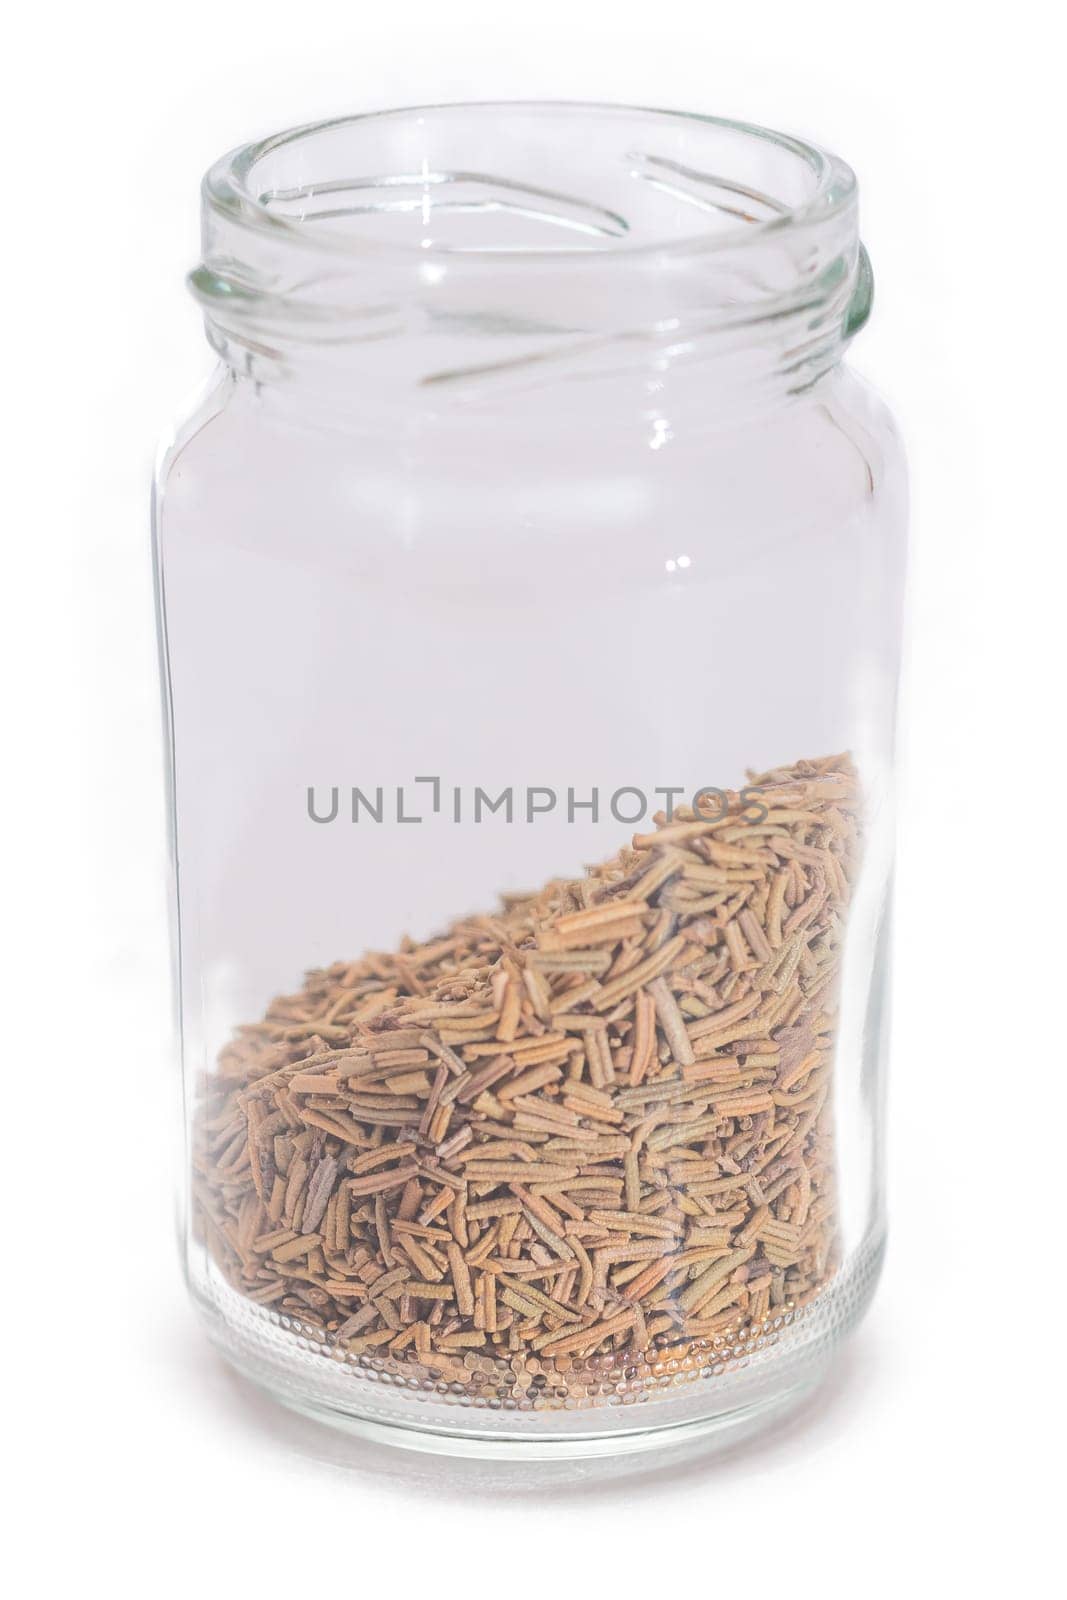 Rosemary Seasoning in a Small Glass Jar Isolated on White Background